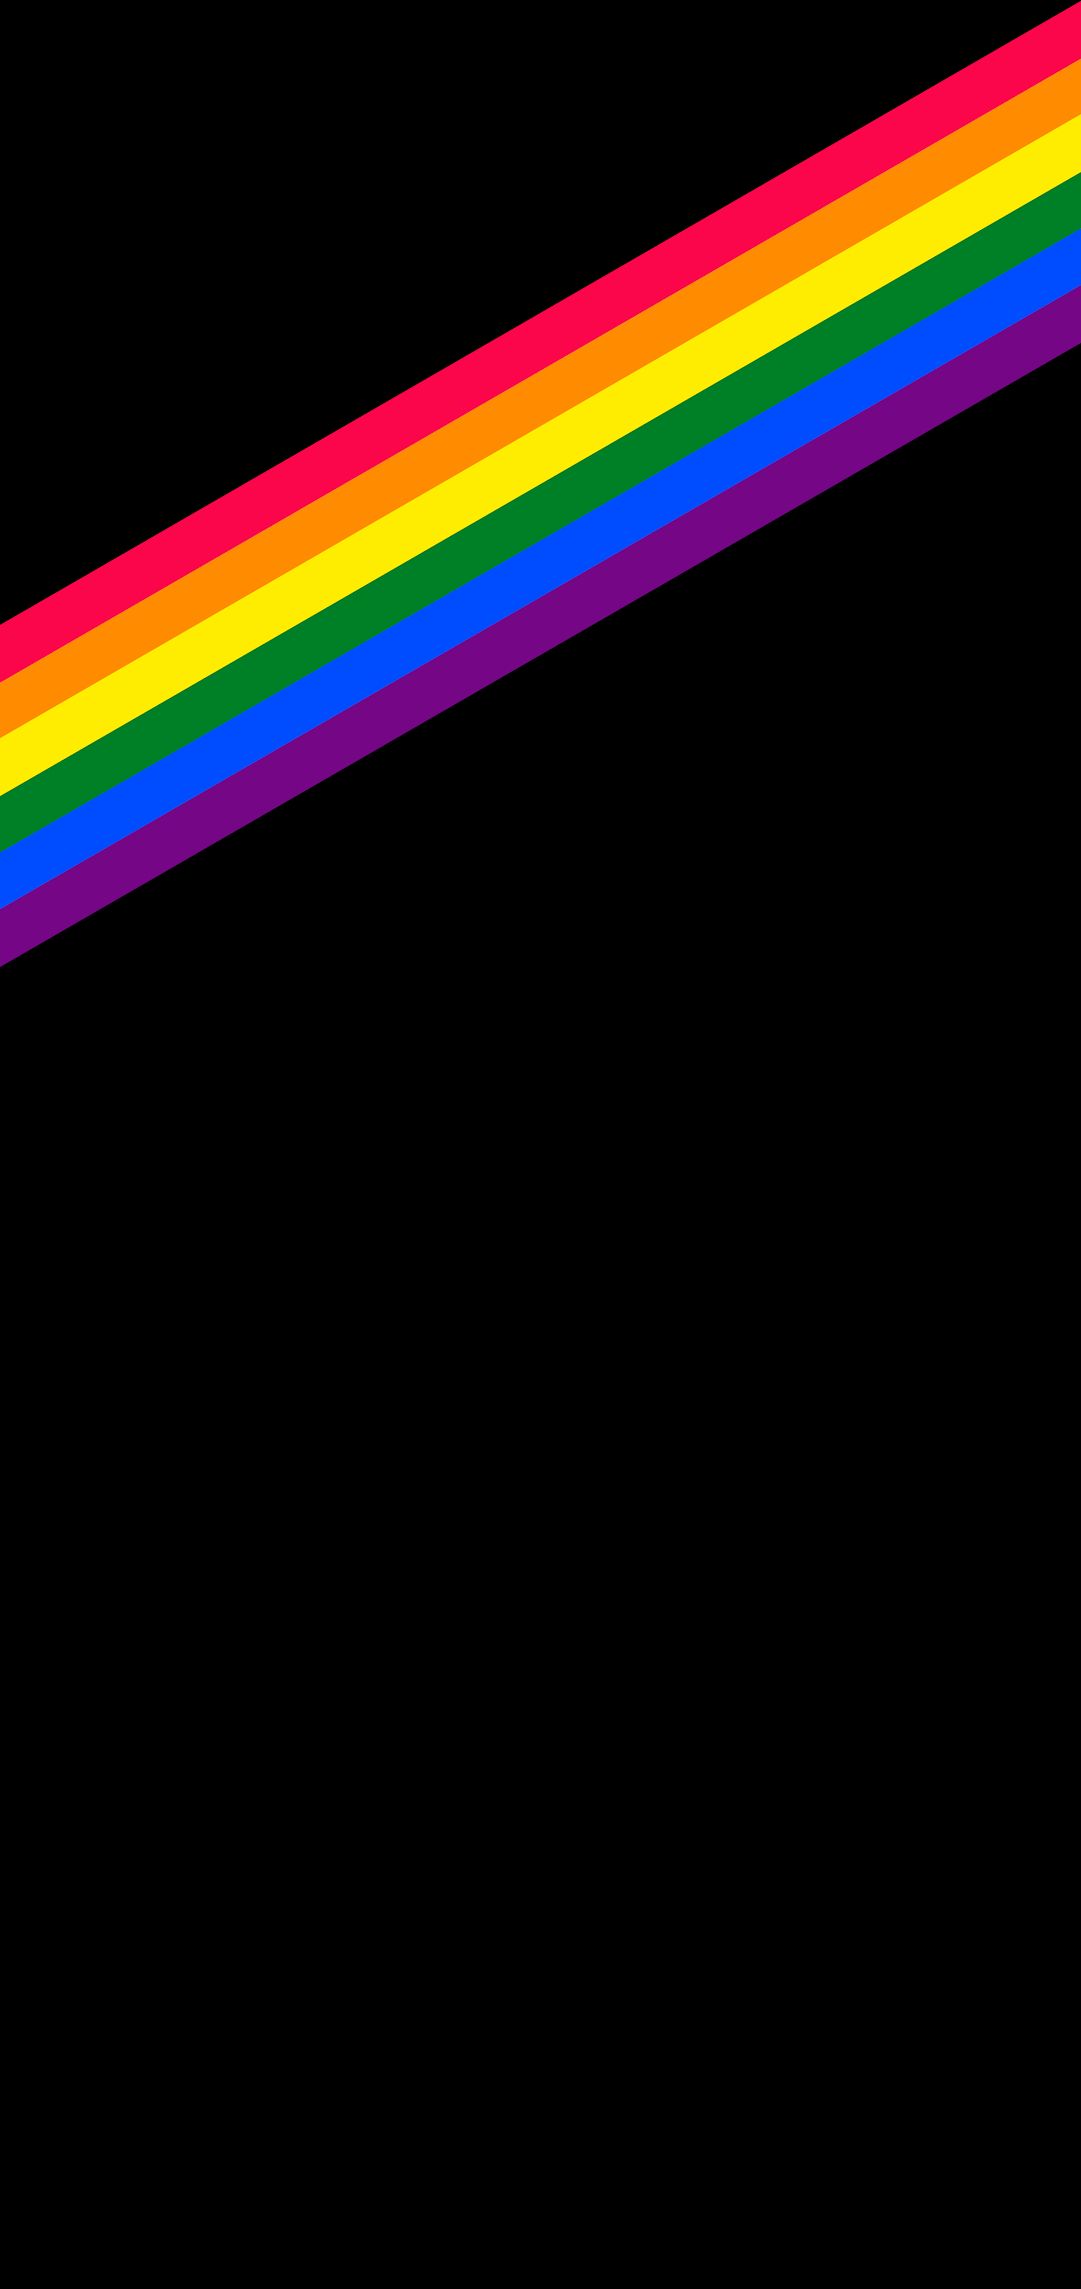 LGBT pride wallpaper [1080x1920] links in the comments